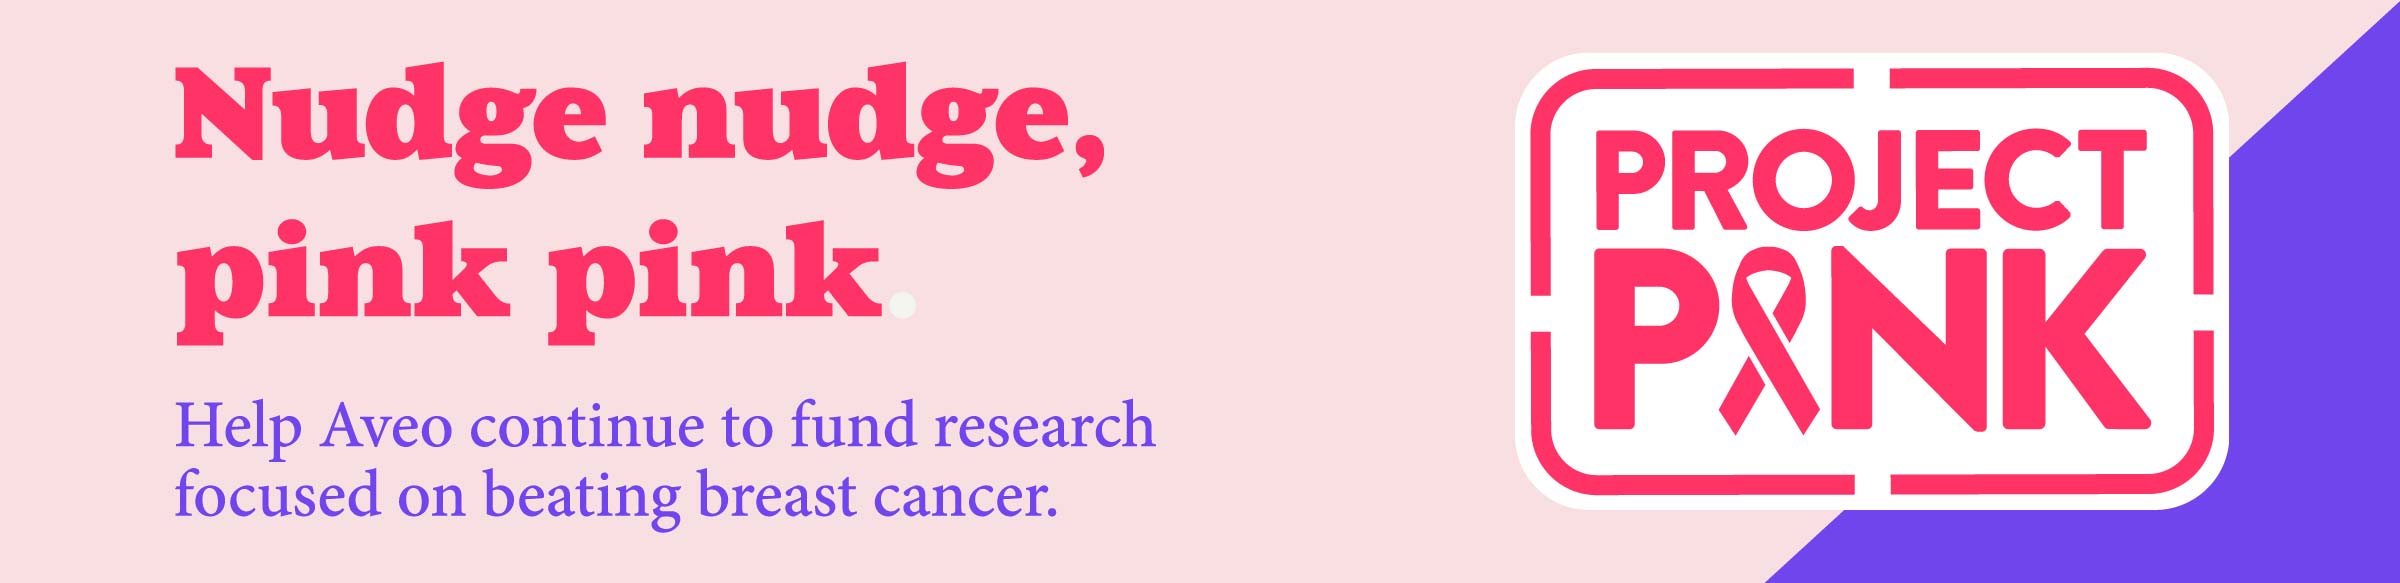 Project Pink   Help Aveo continue to fund research focused on beating breast cancer